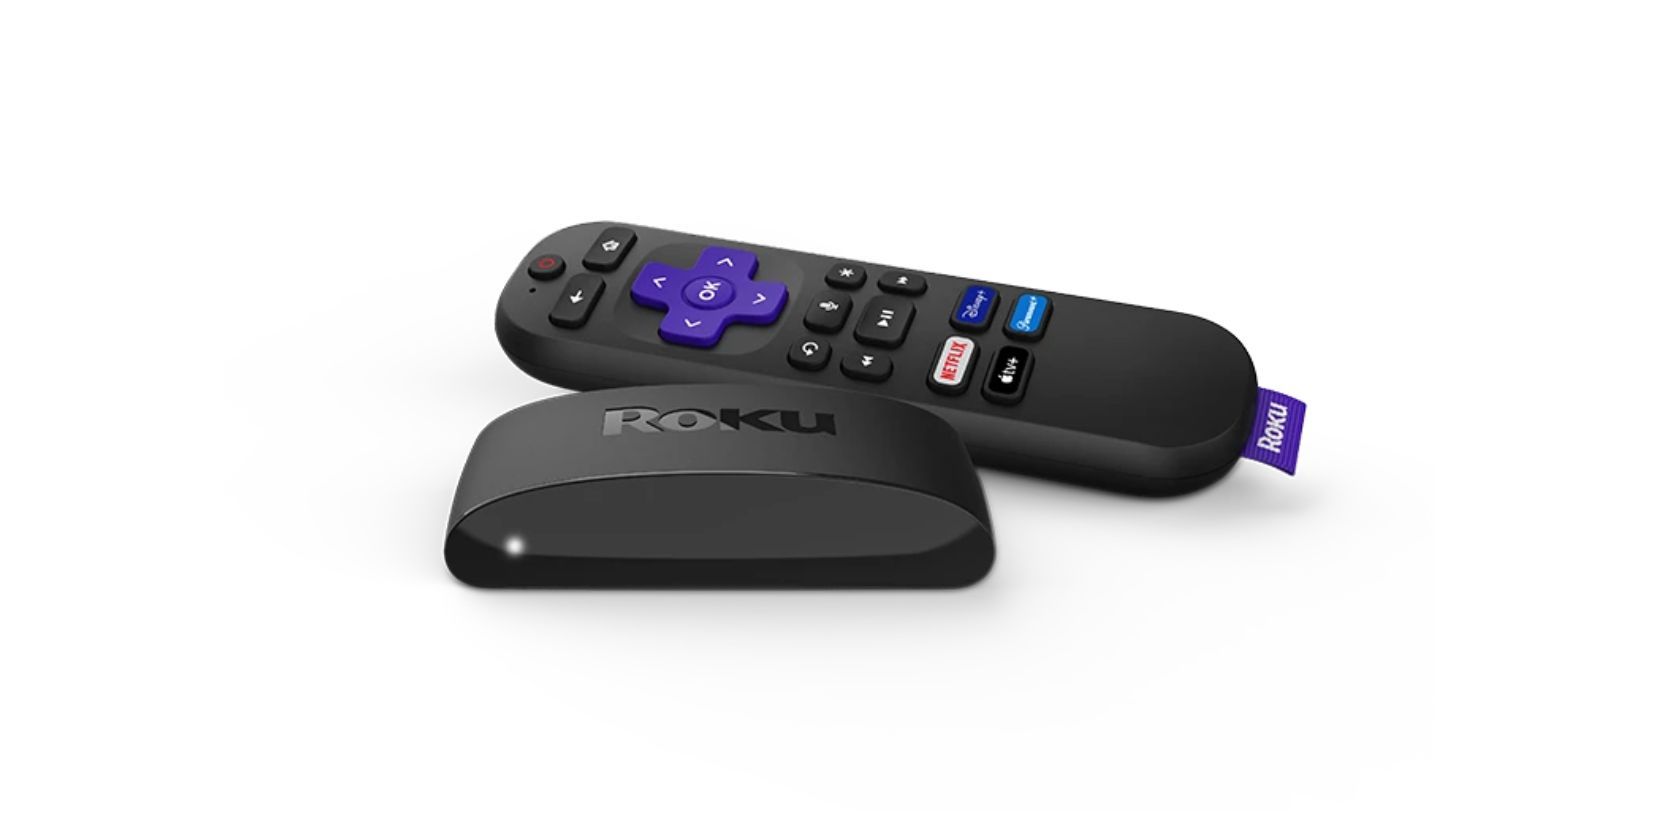 Roku Express 4K+ streaming player and remote